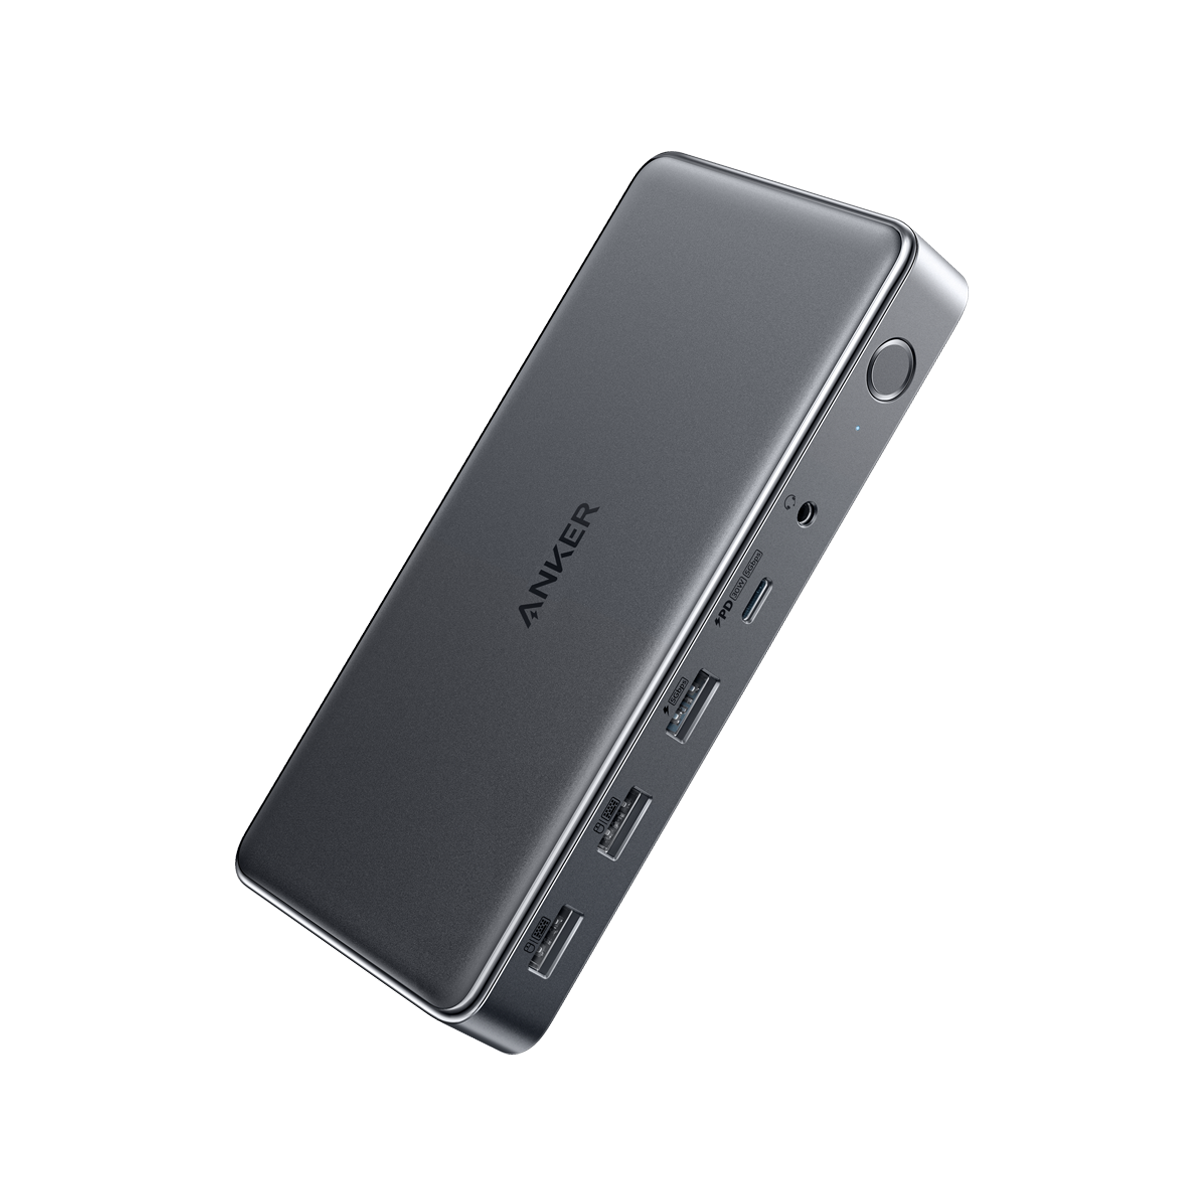 Anker 335 power bank drops by 40% in must-have Black Friday deal